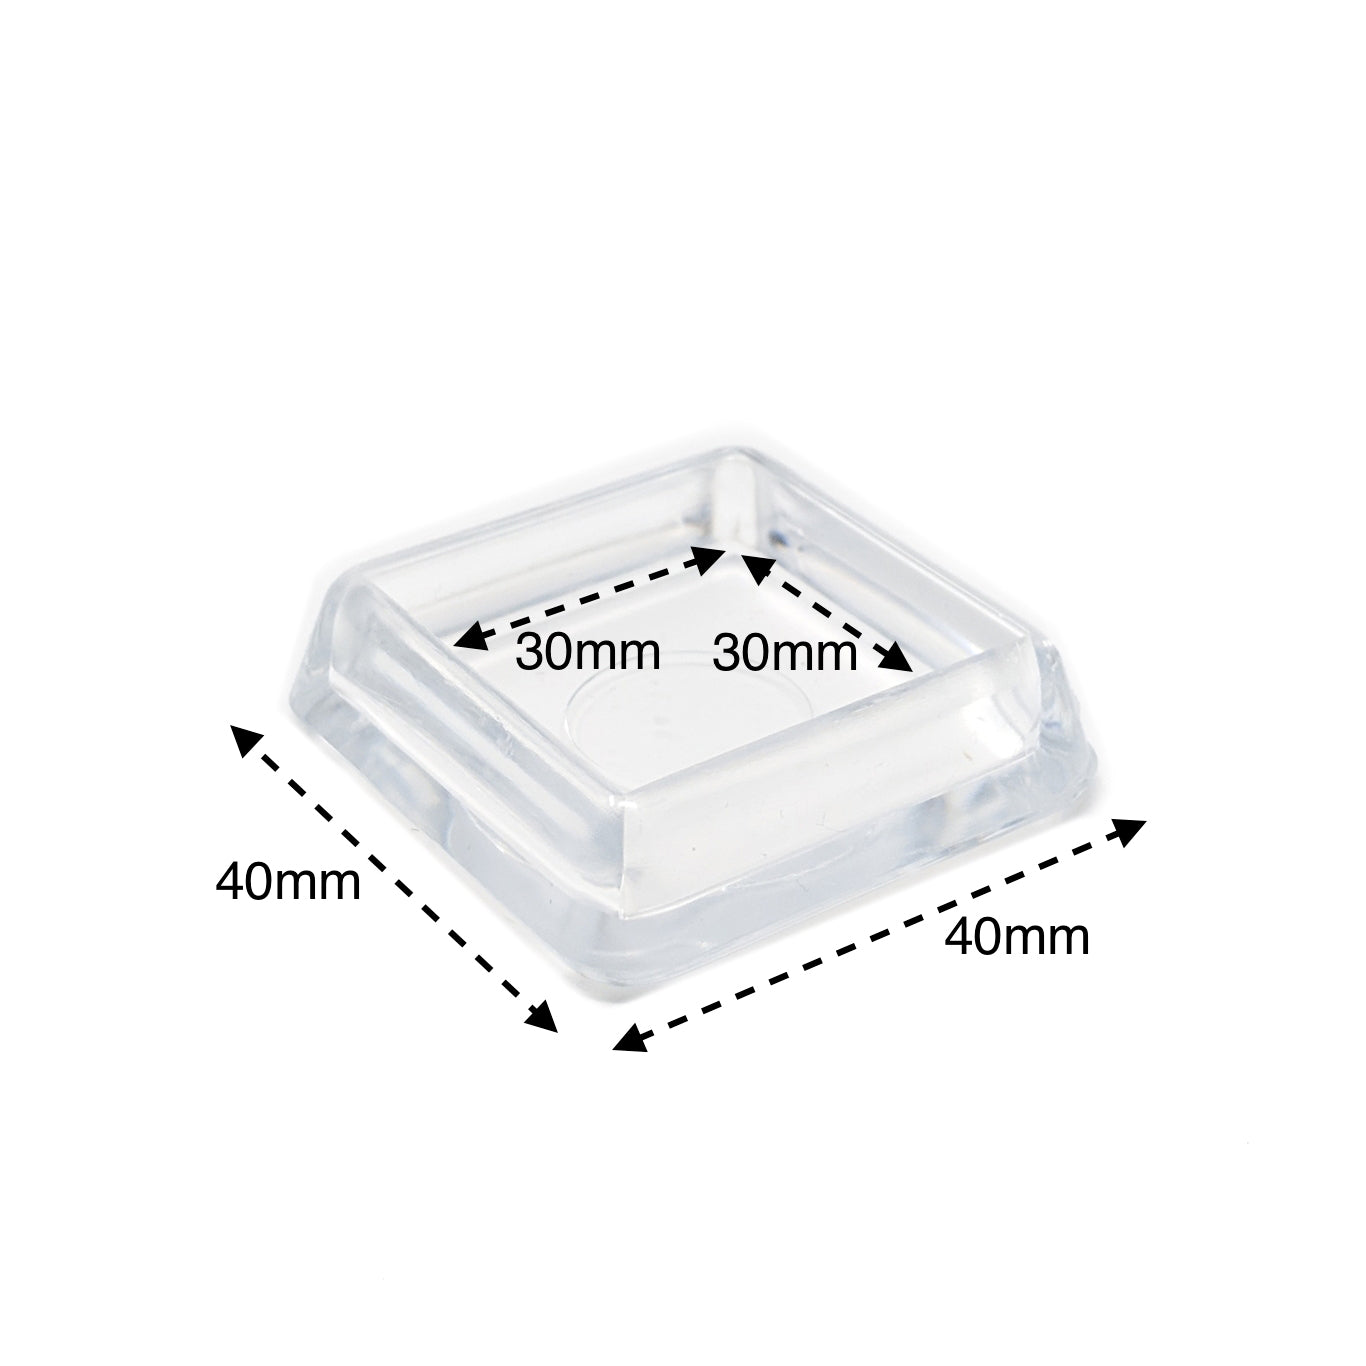 30x30mm Clear Square Furniture Leg Cups Floor Carpet Protector - Made in Germany - Keay Vital Parts